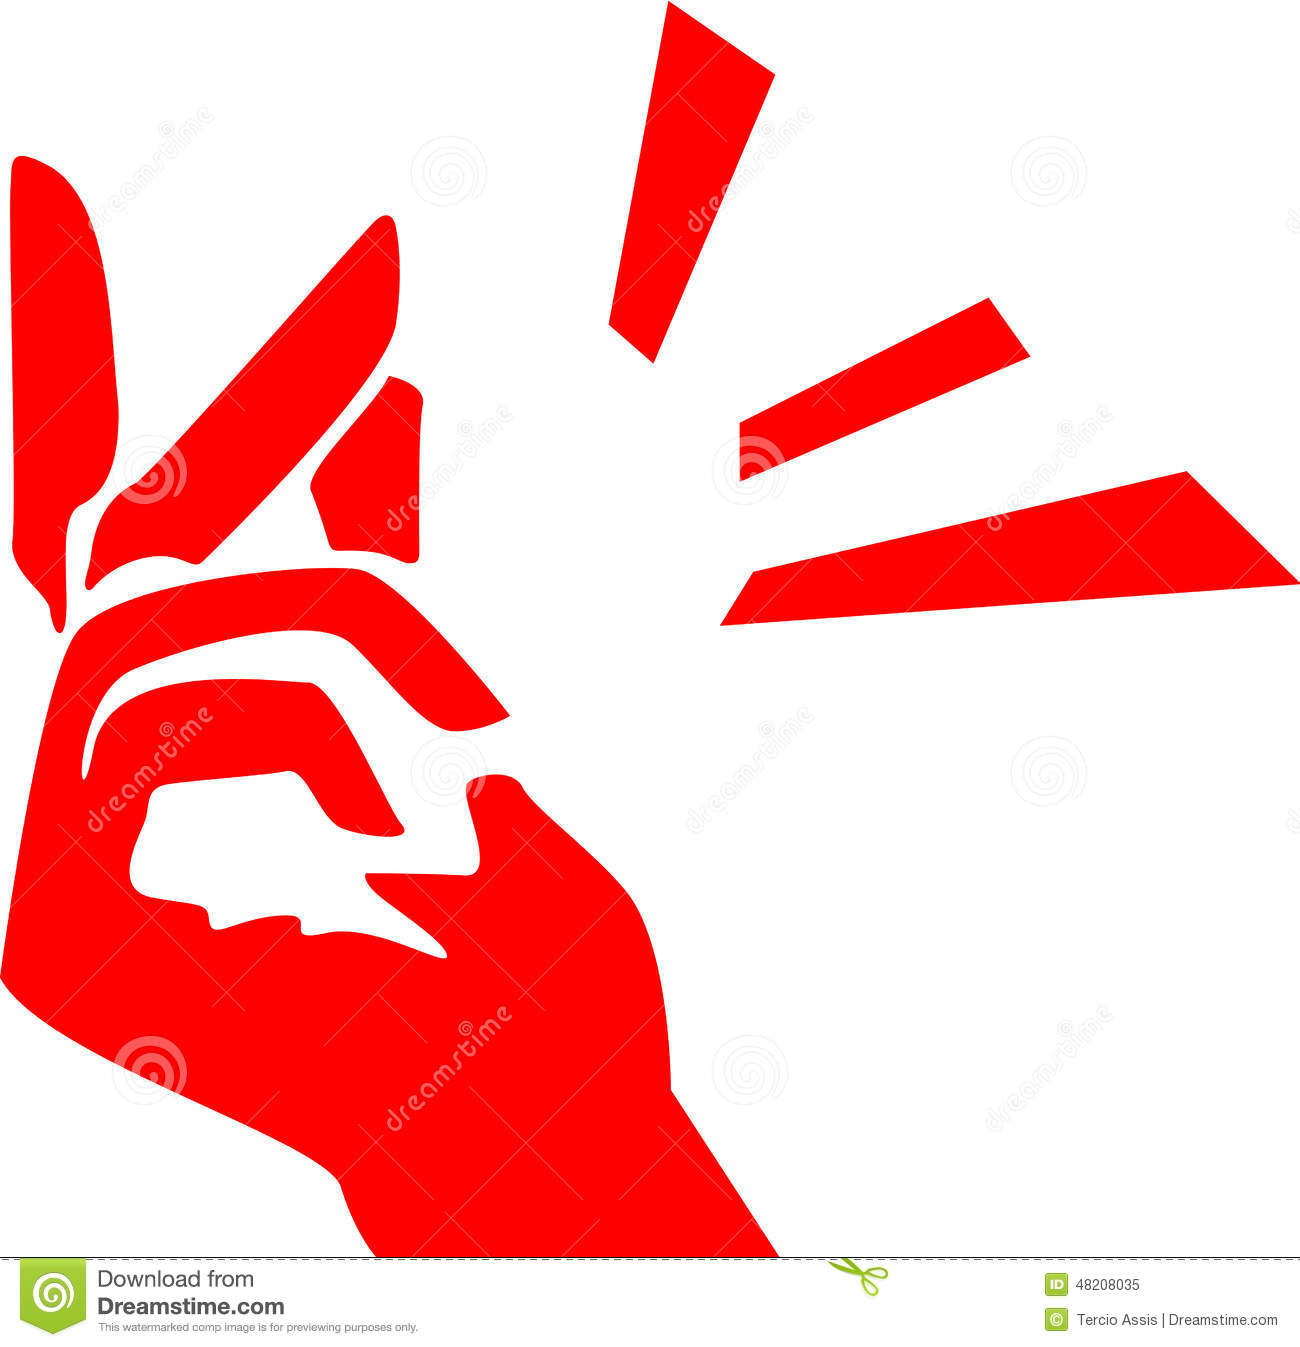 Modern Representation Of A Hand Shows Fingers Snapping As An Idea Or    